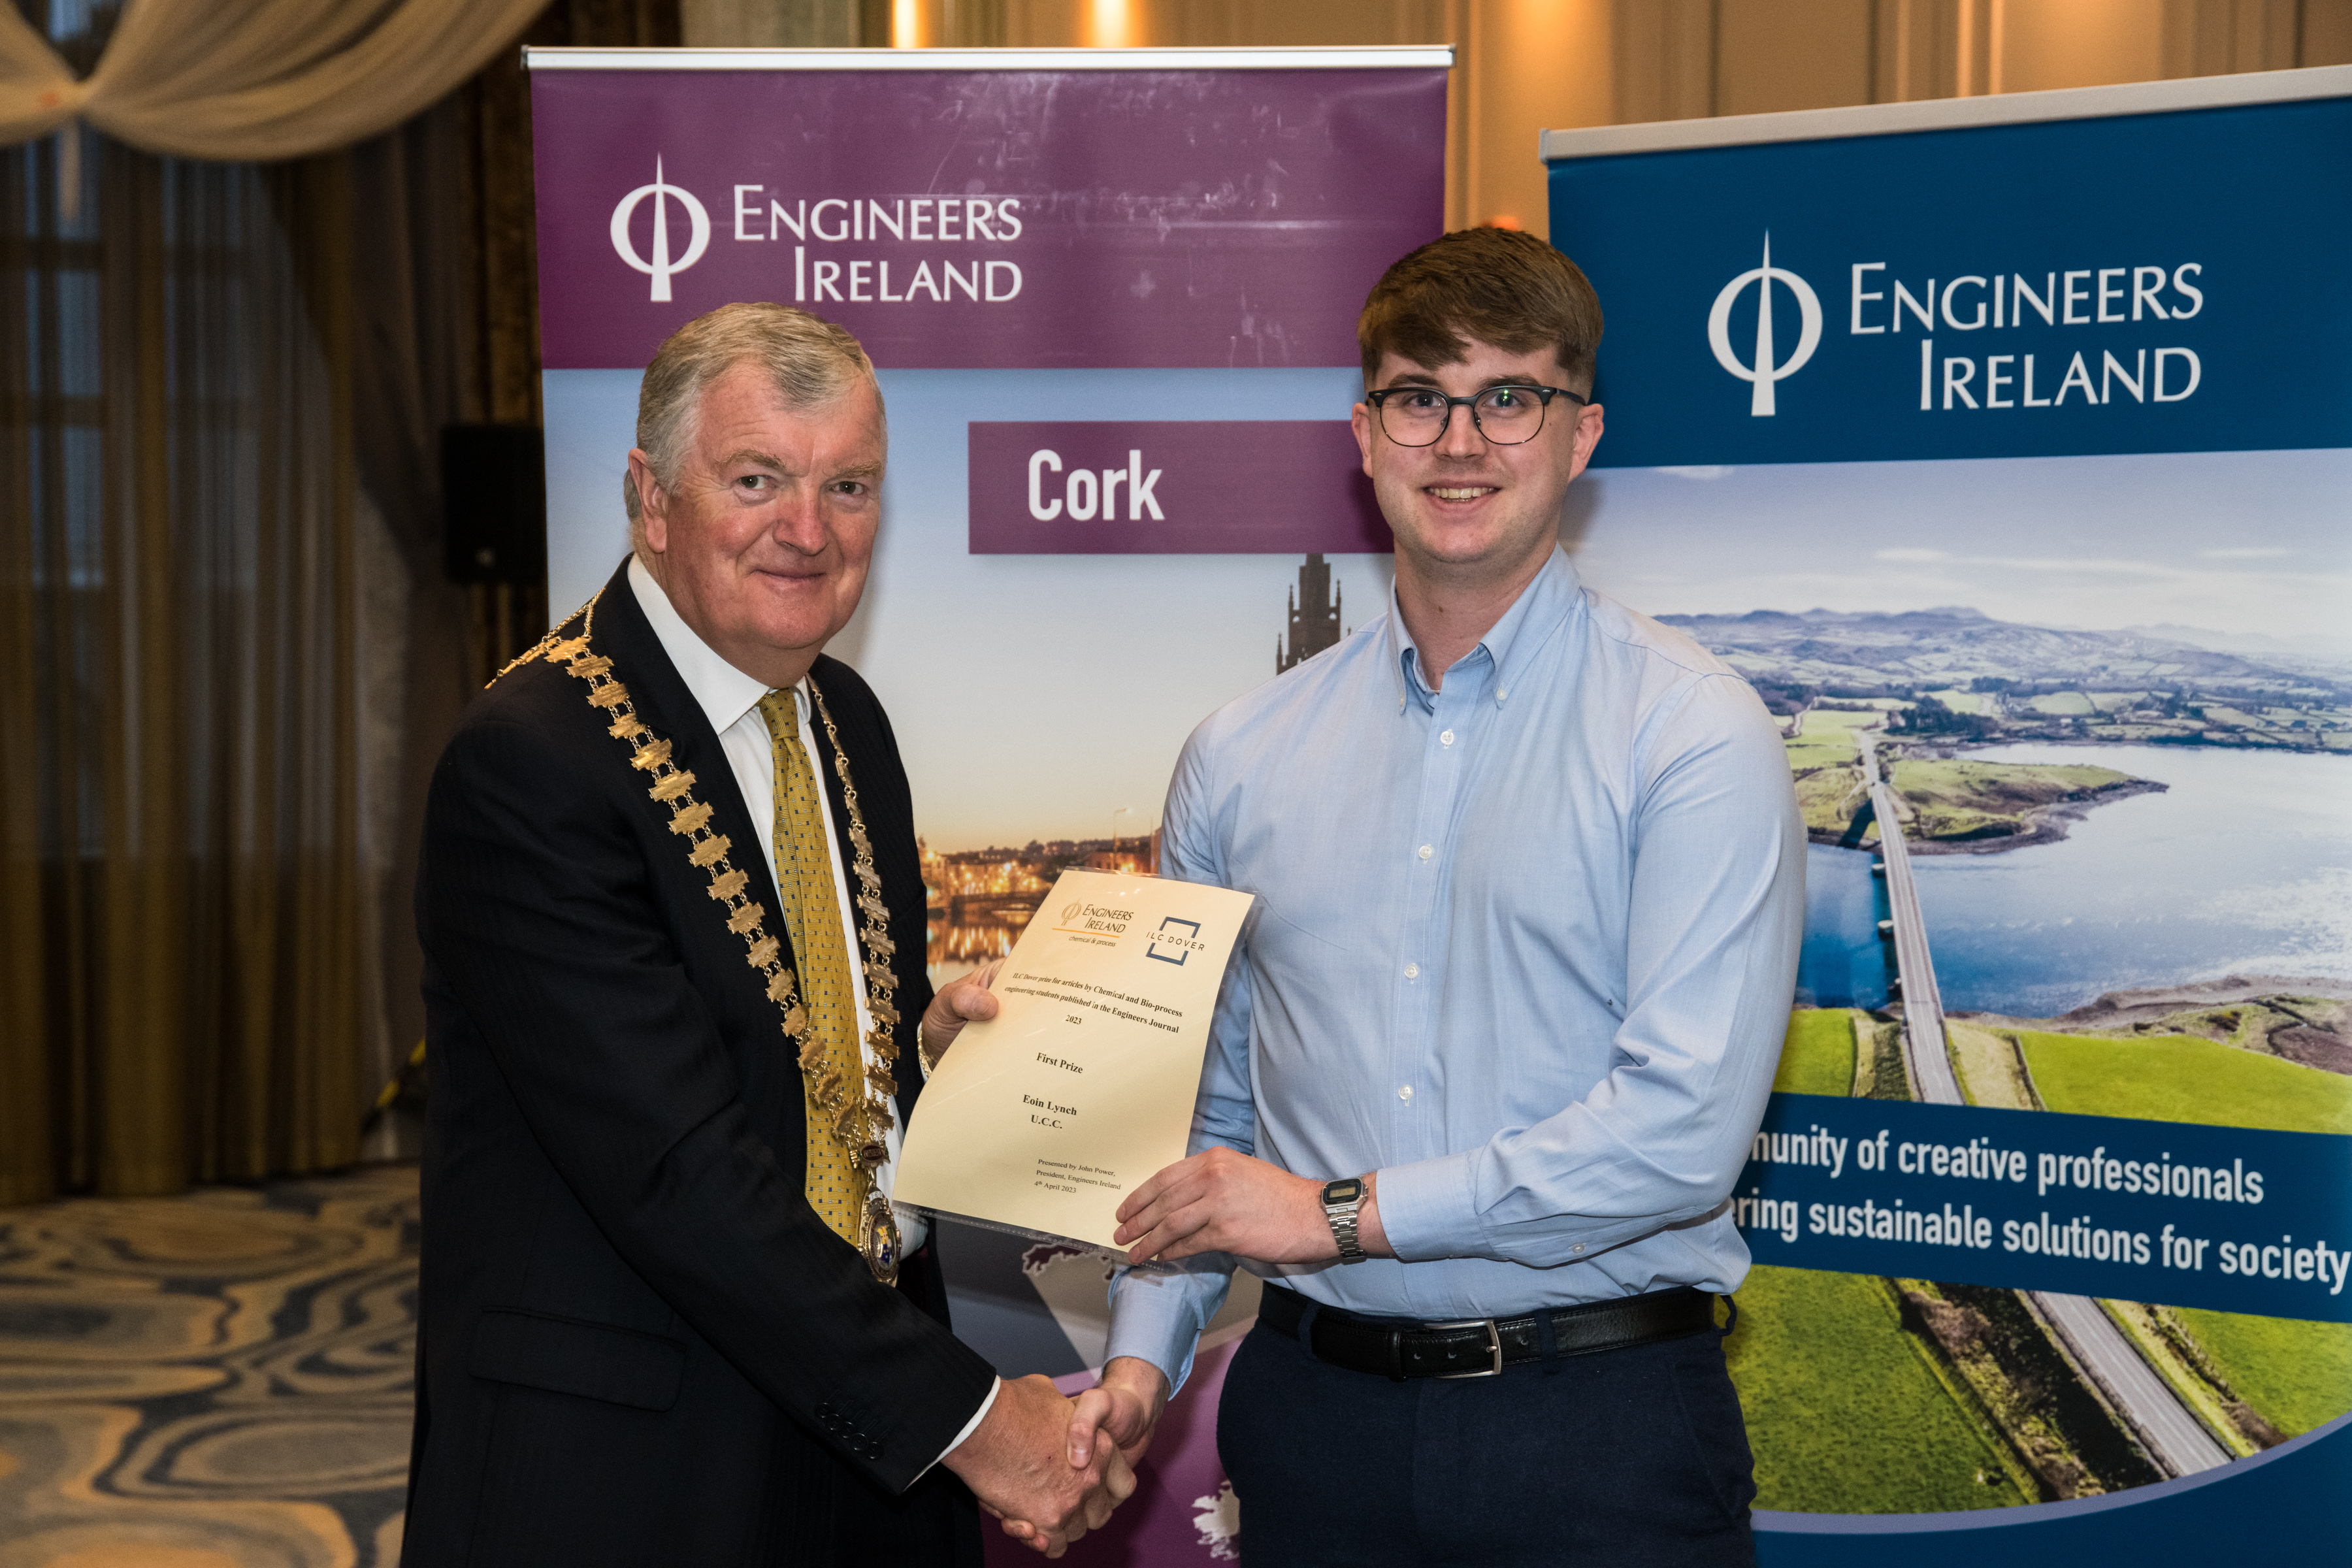 Process & Chemical Engineering Student at UCC wins the 2023 ILC Dover Journal Competition